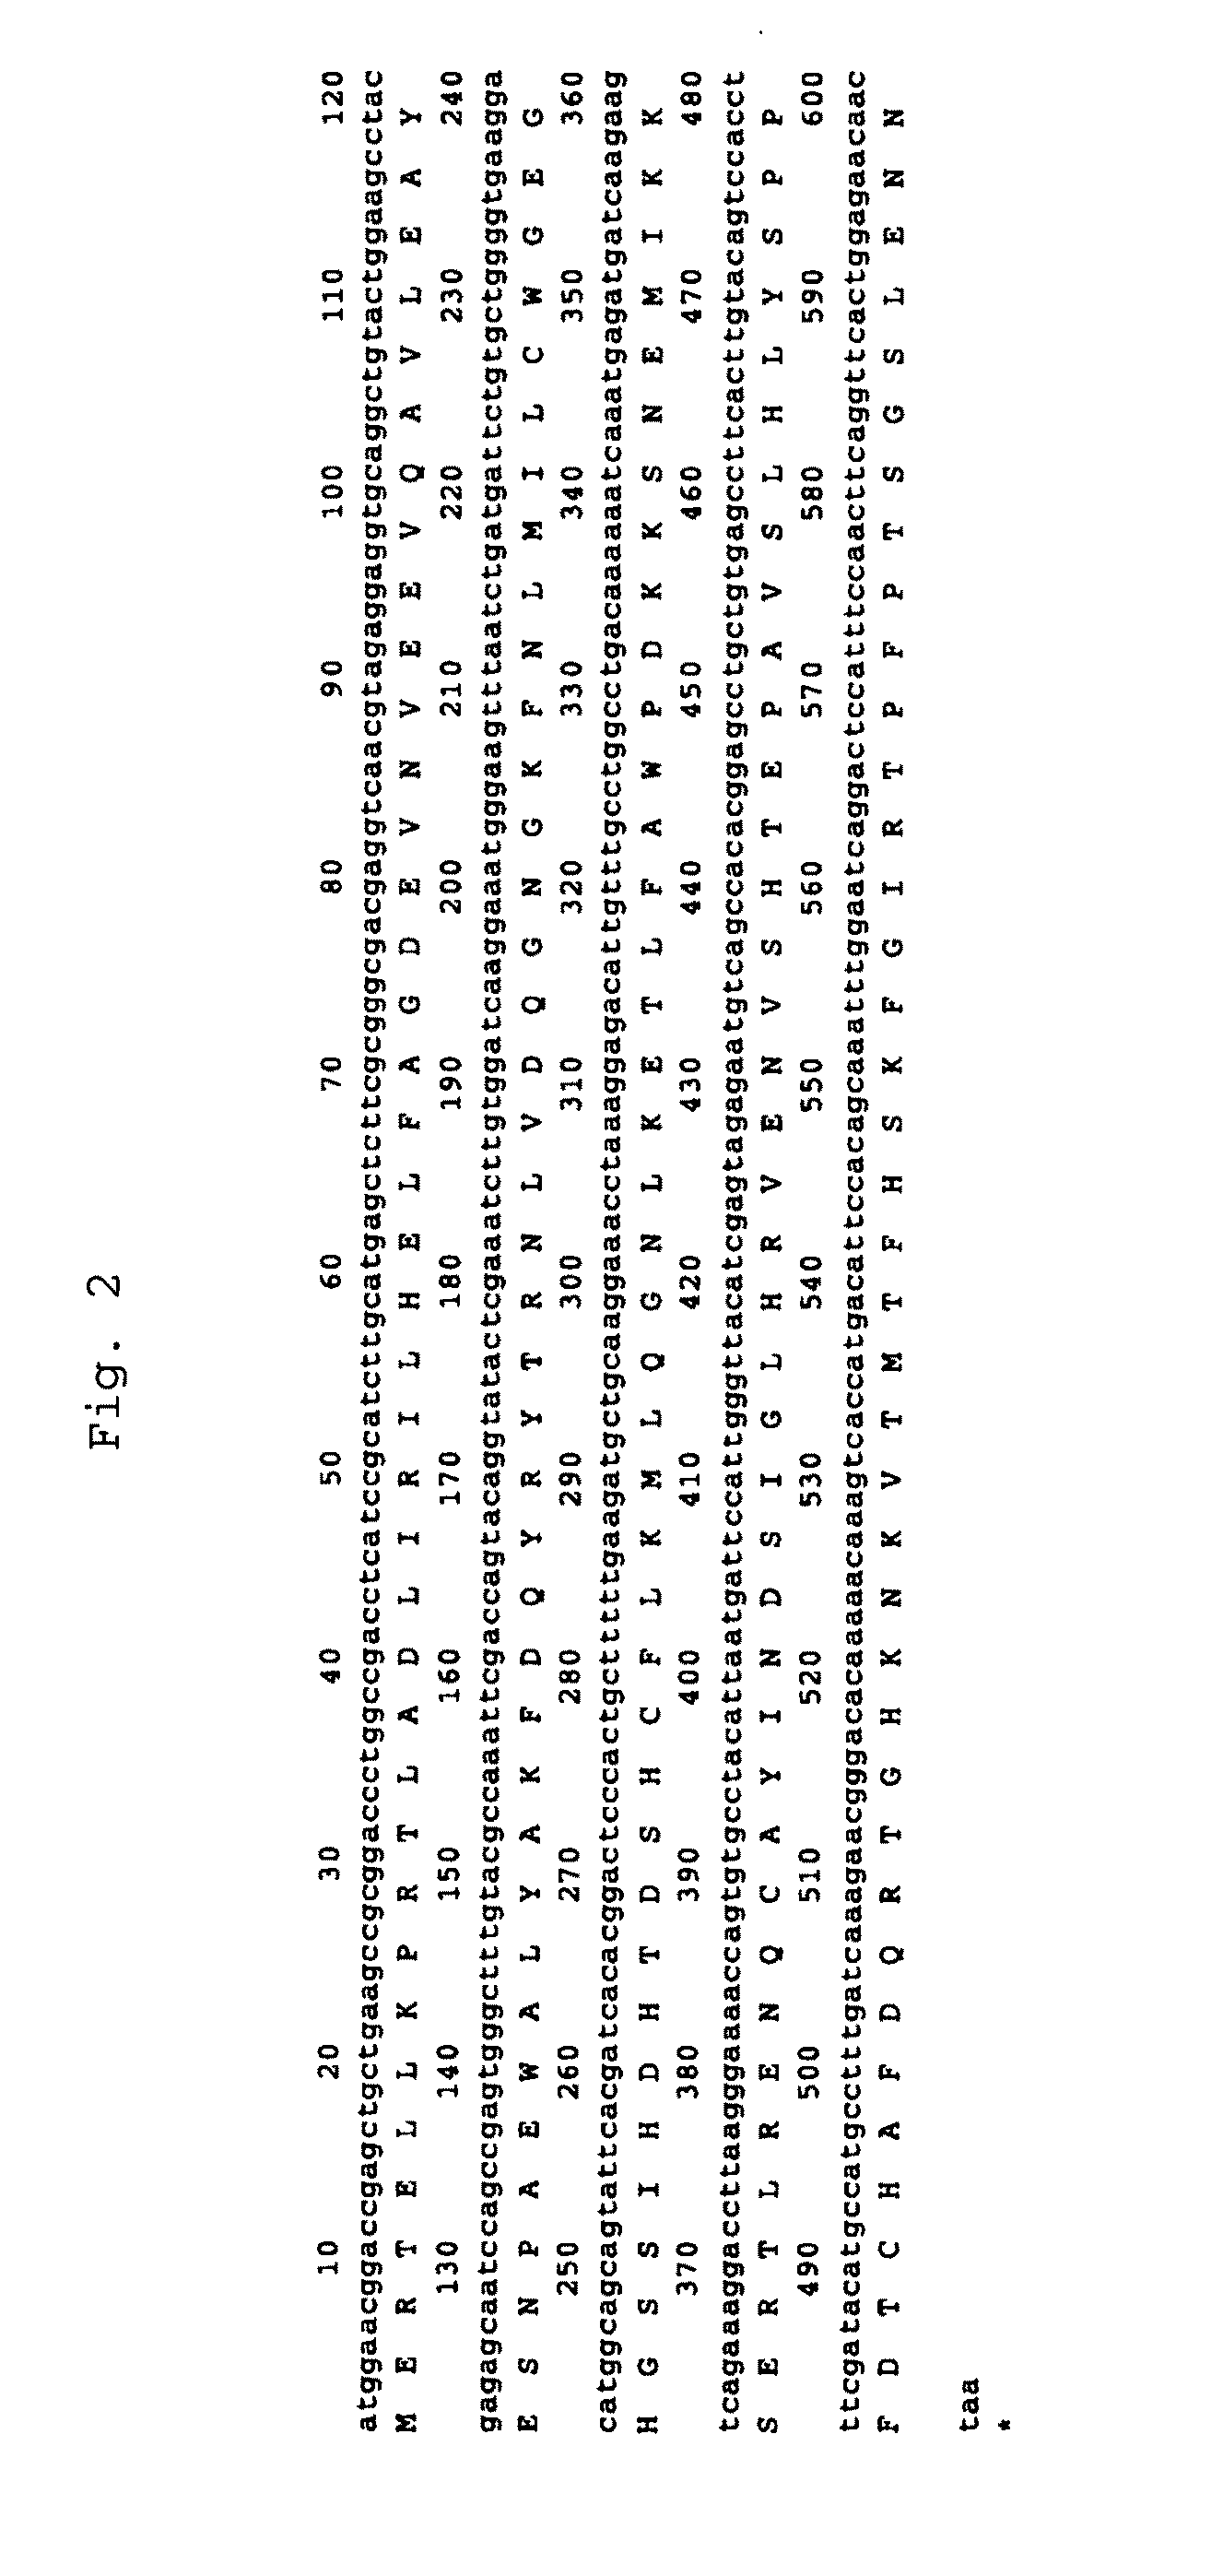 Method for production of polypeptide